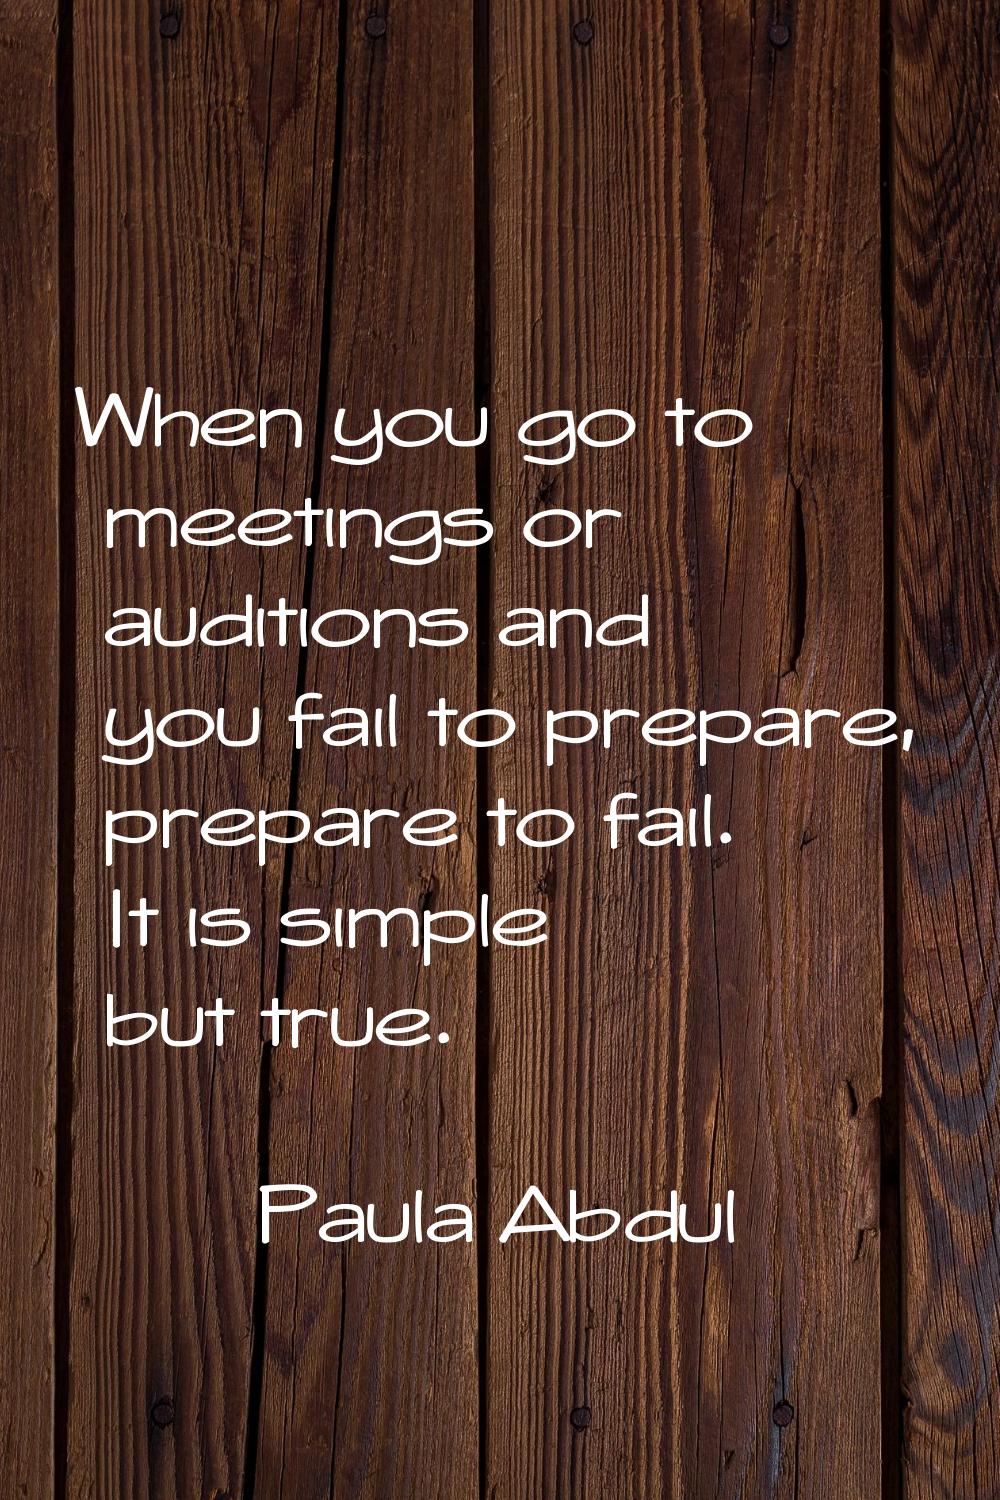 When you go to meetings or auditions and you fail to prepare, prepare to fail. It is simple but tru